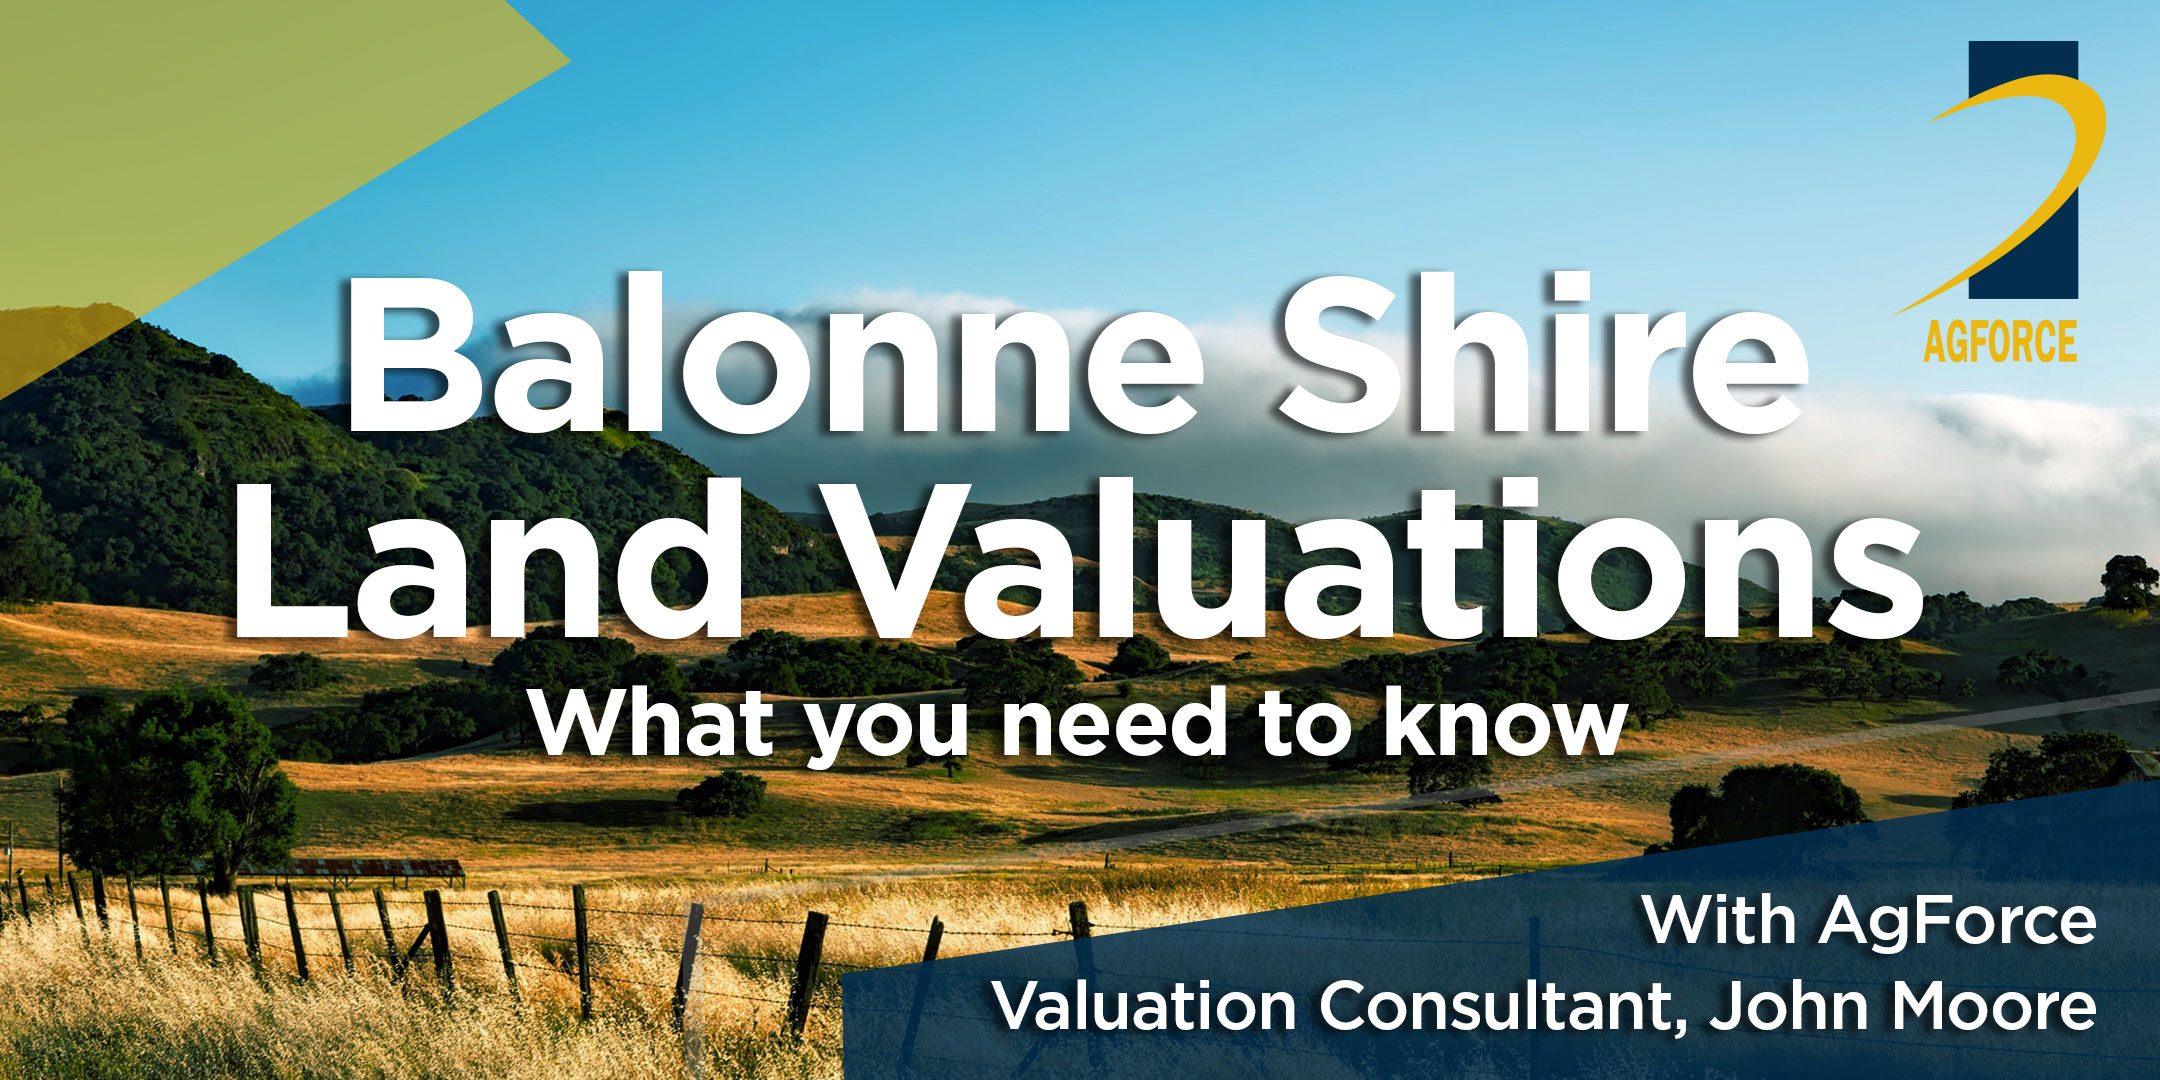 Balonne Shire Land Valuations: what you need to know, with AgForce valuation consultant John Moore.